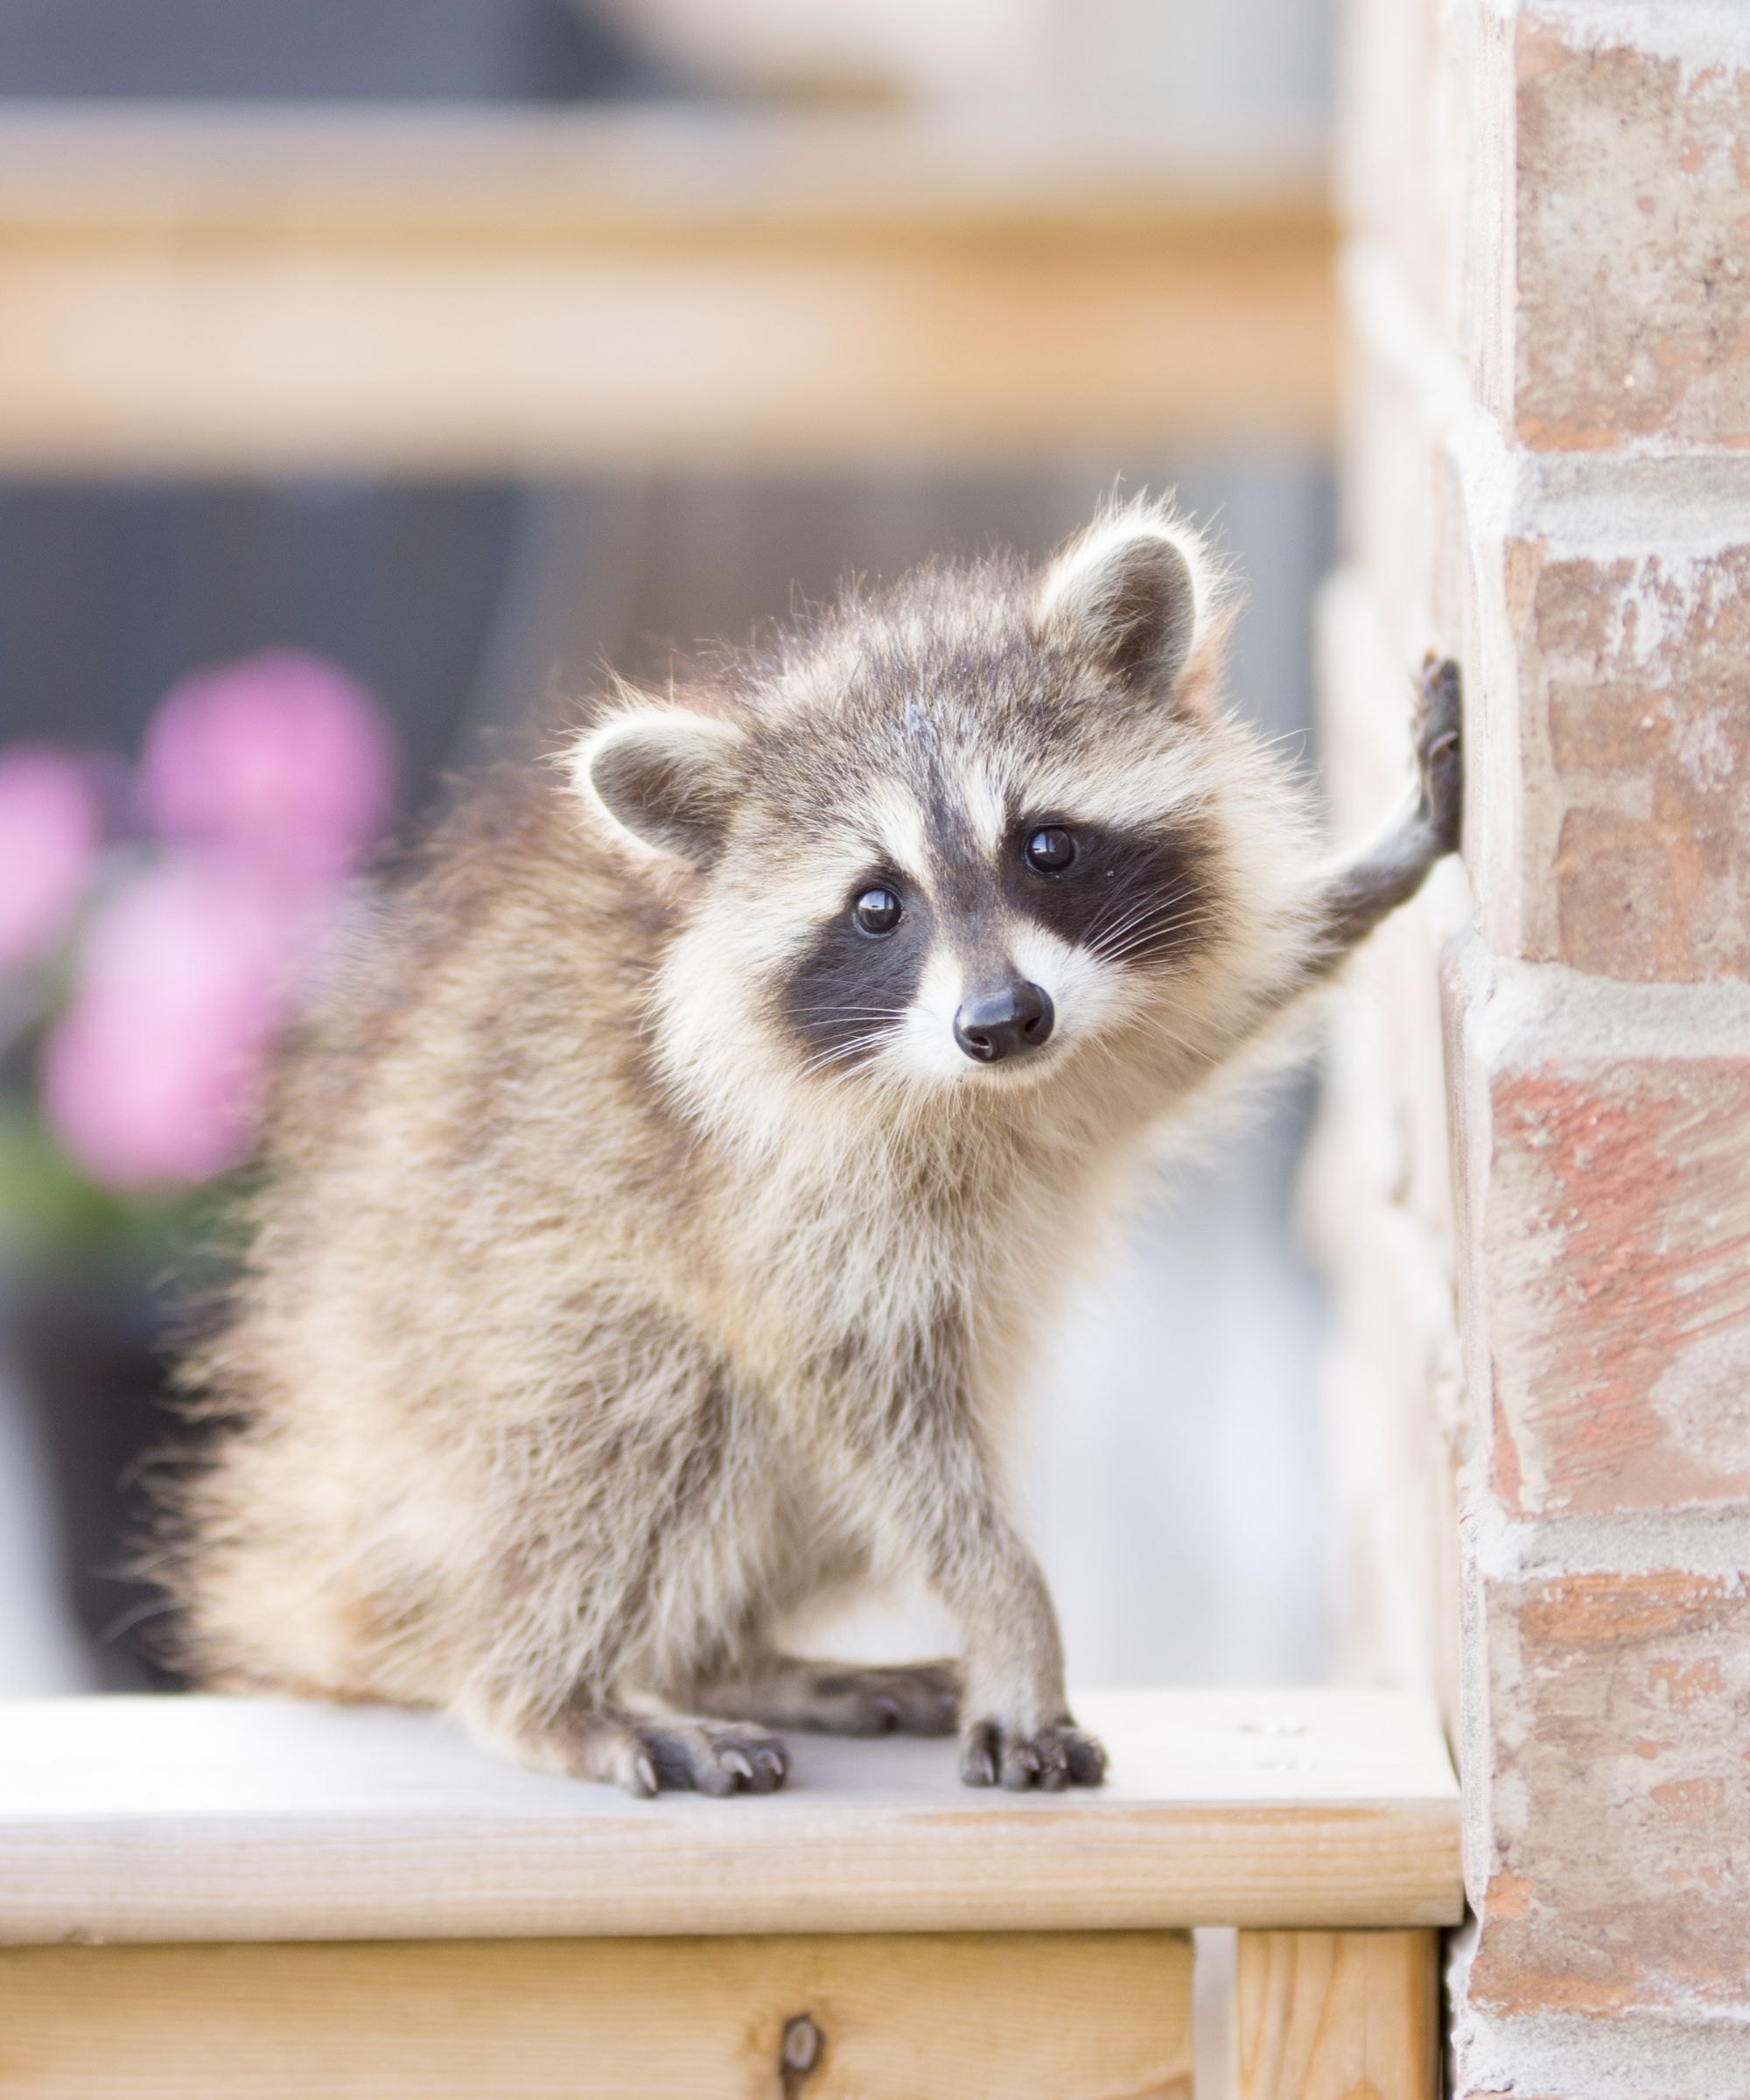 Racoon next to wall